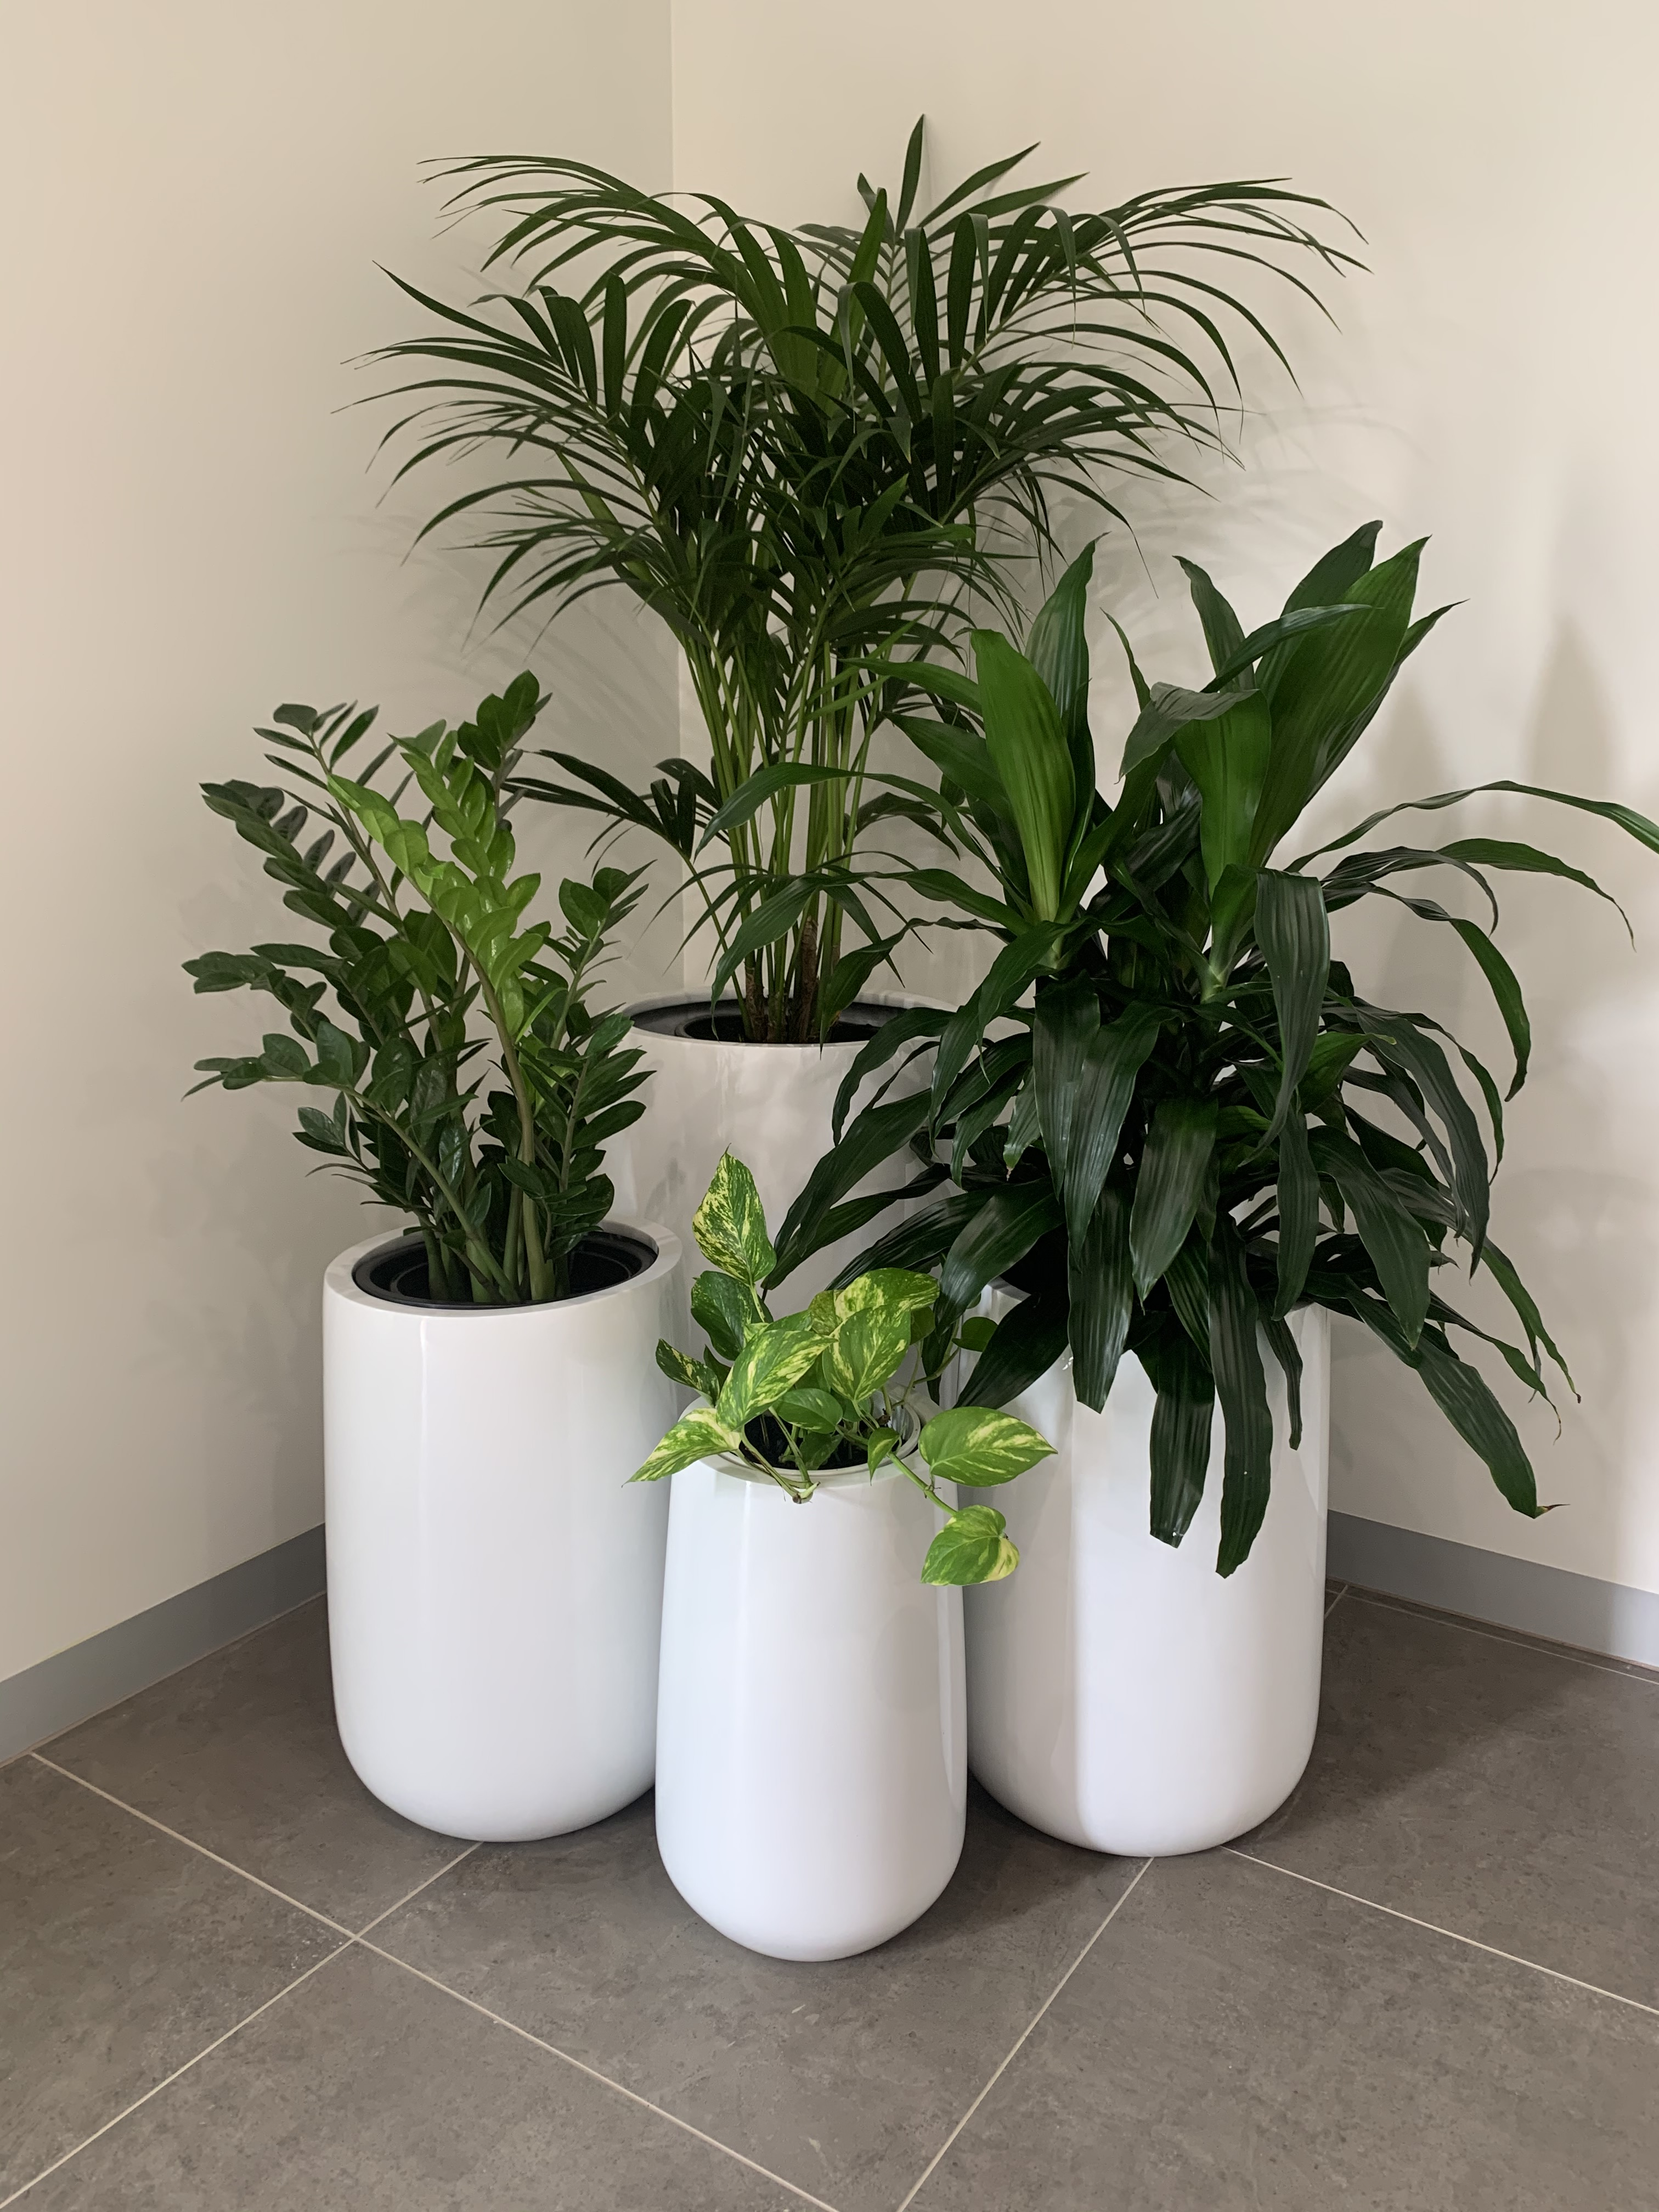 Cluster of Urn Plants in Office